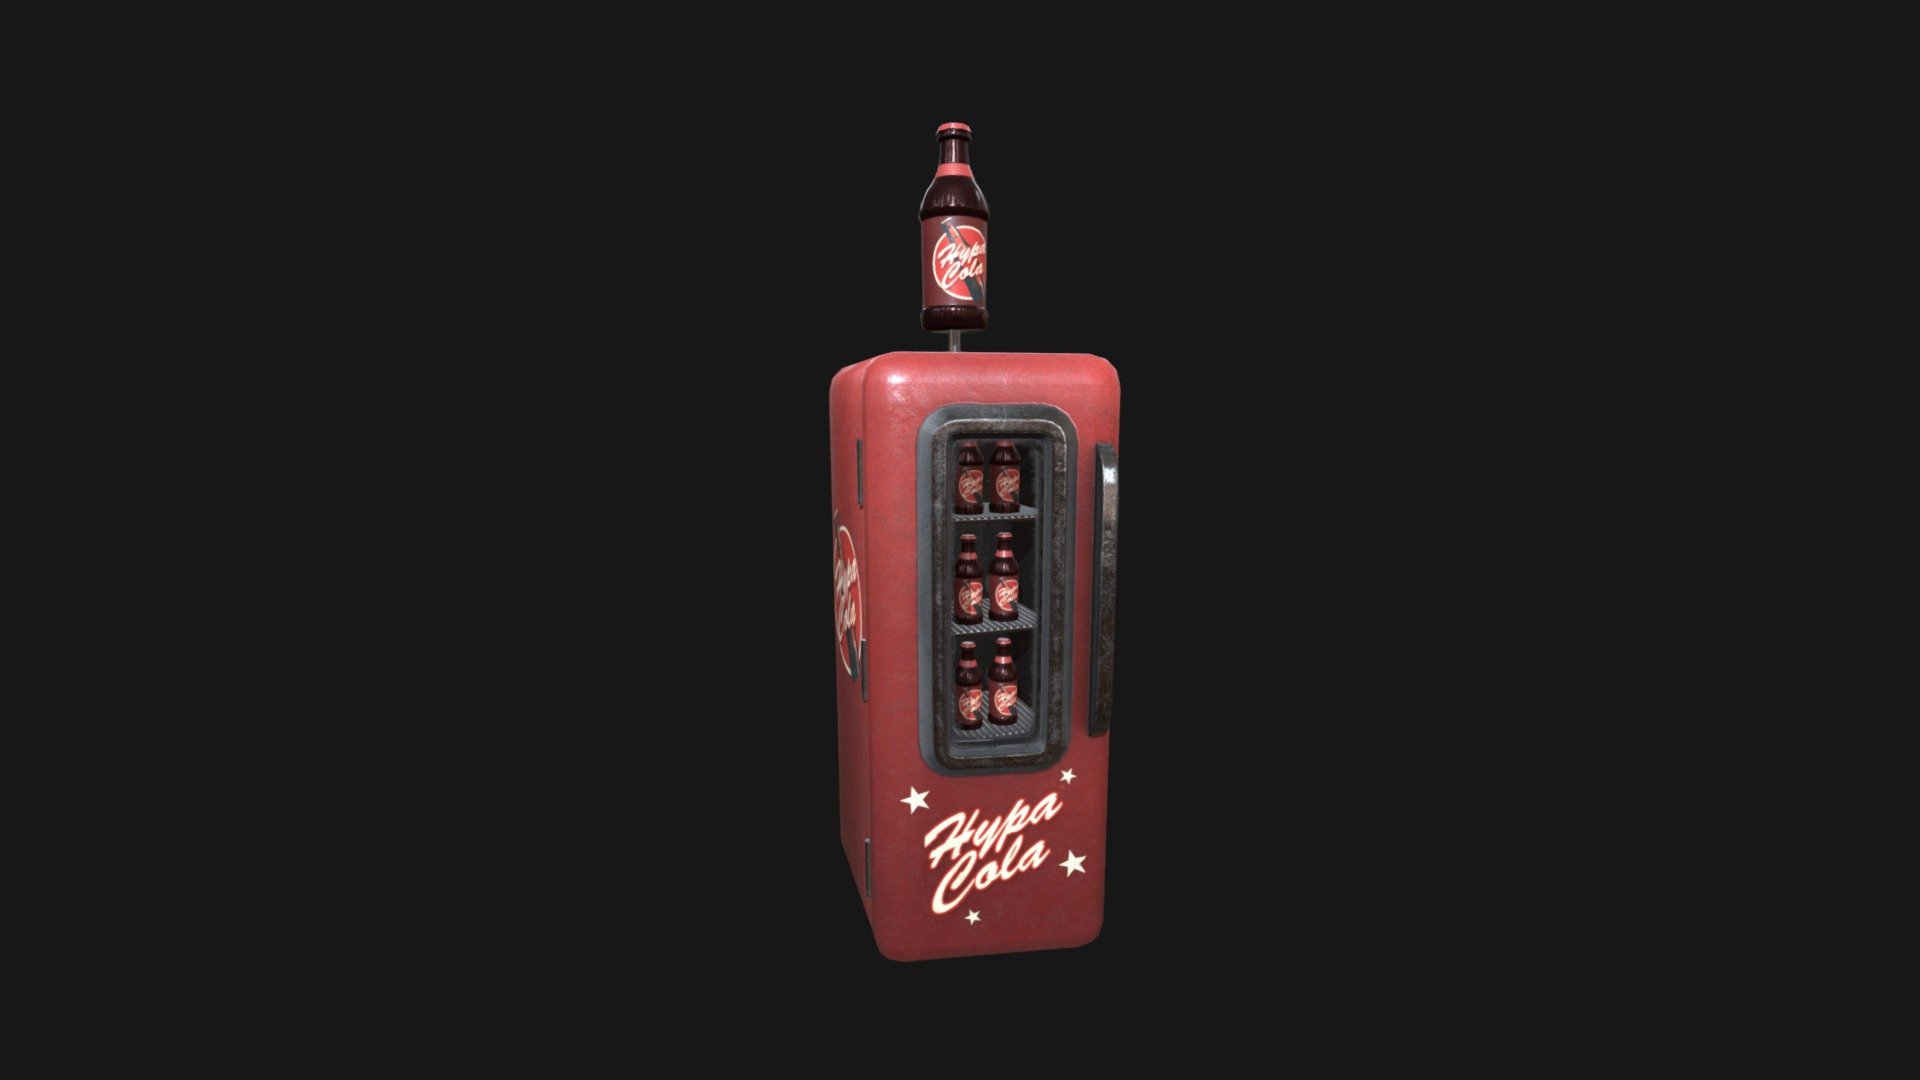 Dive into the retro-futuristic vibes with my Hypa Cola Fridge, a 3D creation made in Blender and textured in Substance Painter. Drawing inspiration from the iconic Nuka Cola aesthetic in Fallout, this piece features a tris count of 4500, delivering a perfect blend of style and performance. The sleek design and weathered textures capture the essence of a bygone era in a post-apocalyptic world. A minimalist yet evocative addition to your digital art collection.

Check renders for this Object on my Artstation: https://www.artstation.com/artwork/04b8nE

4500 Tris
1 Material
2K Textures - Hypa Cola Fridge - Download Free 3D model by TemmieTim 3d model